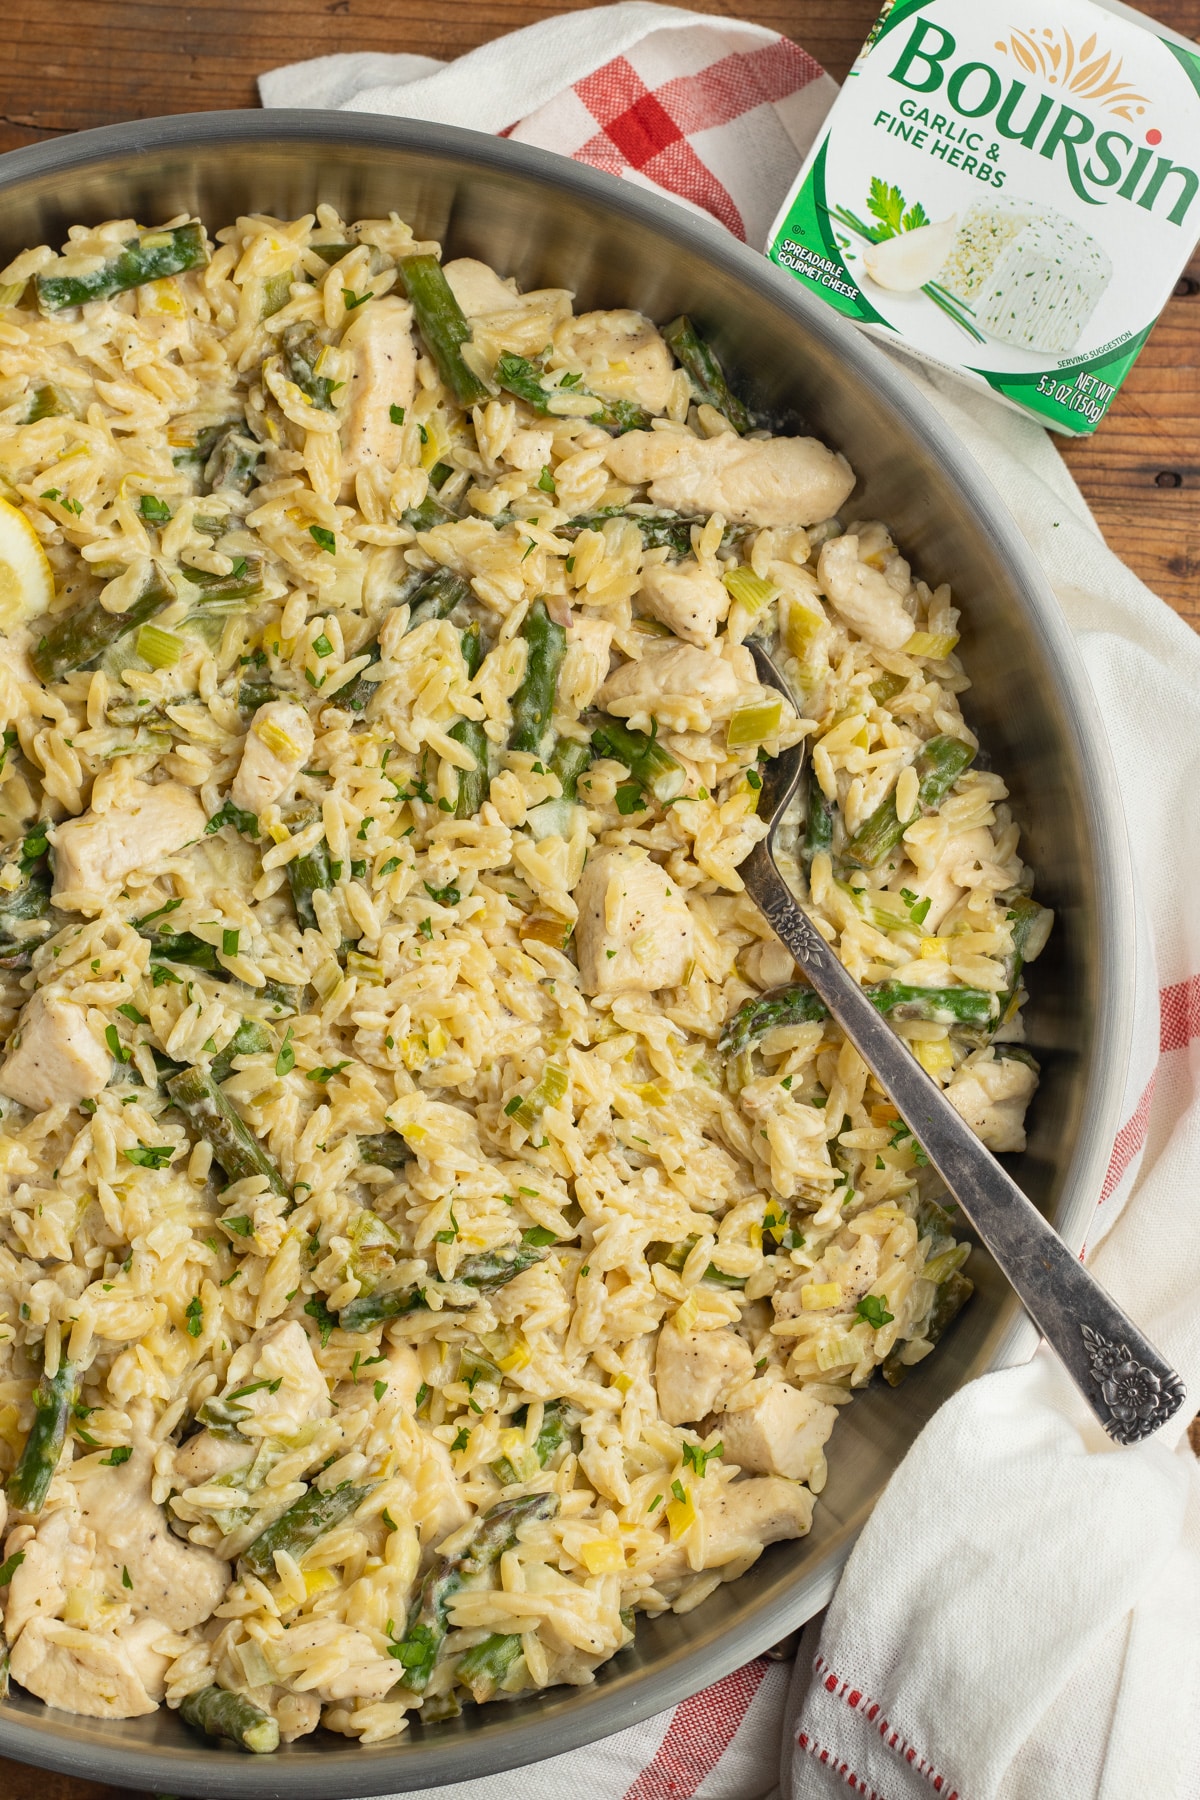 This is a picture of the chicken boursin orzo in a skillet with a package of boursin on the side.